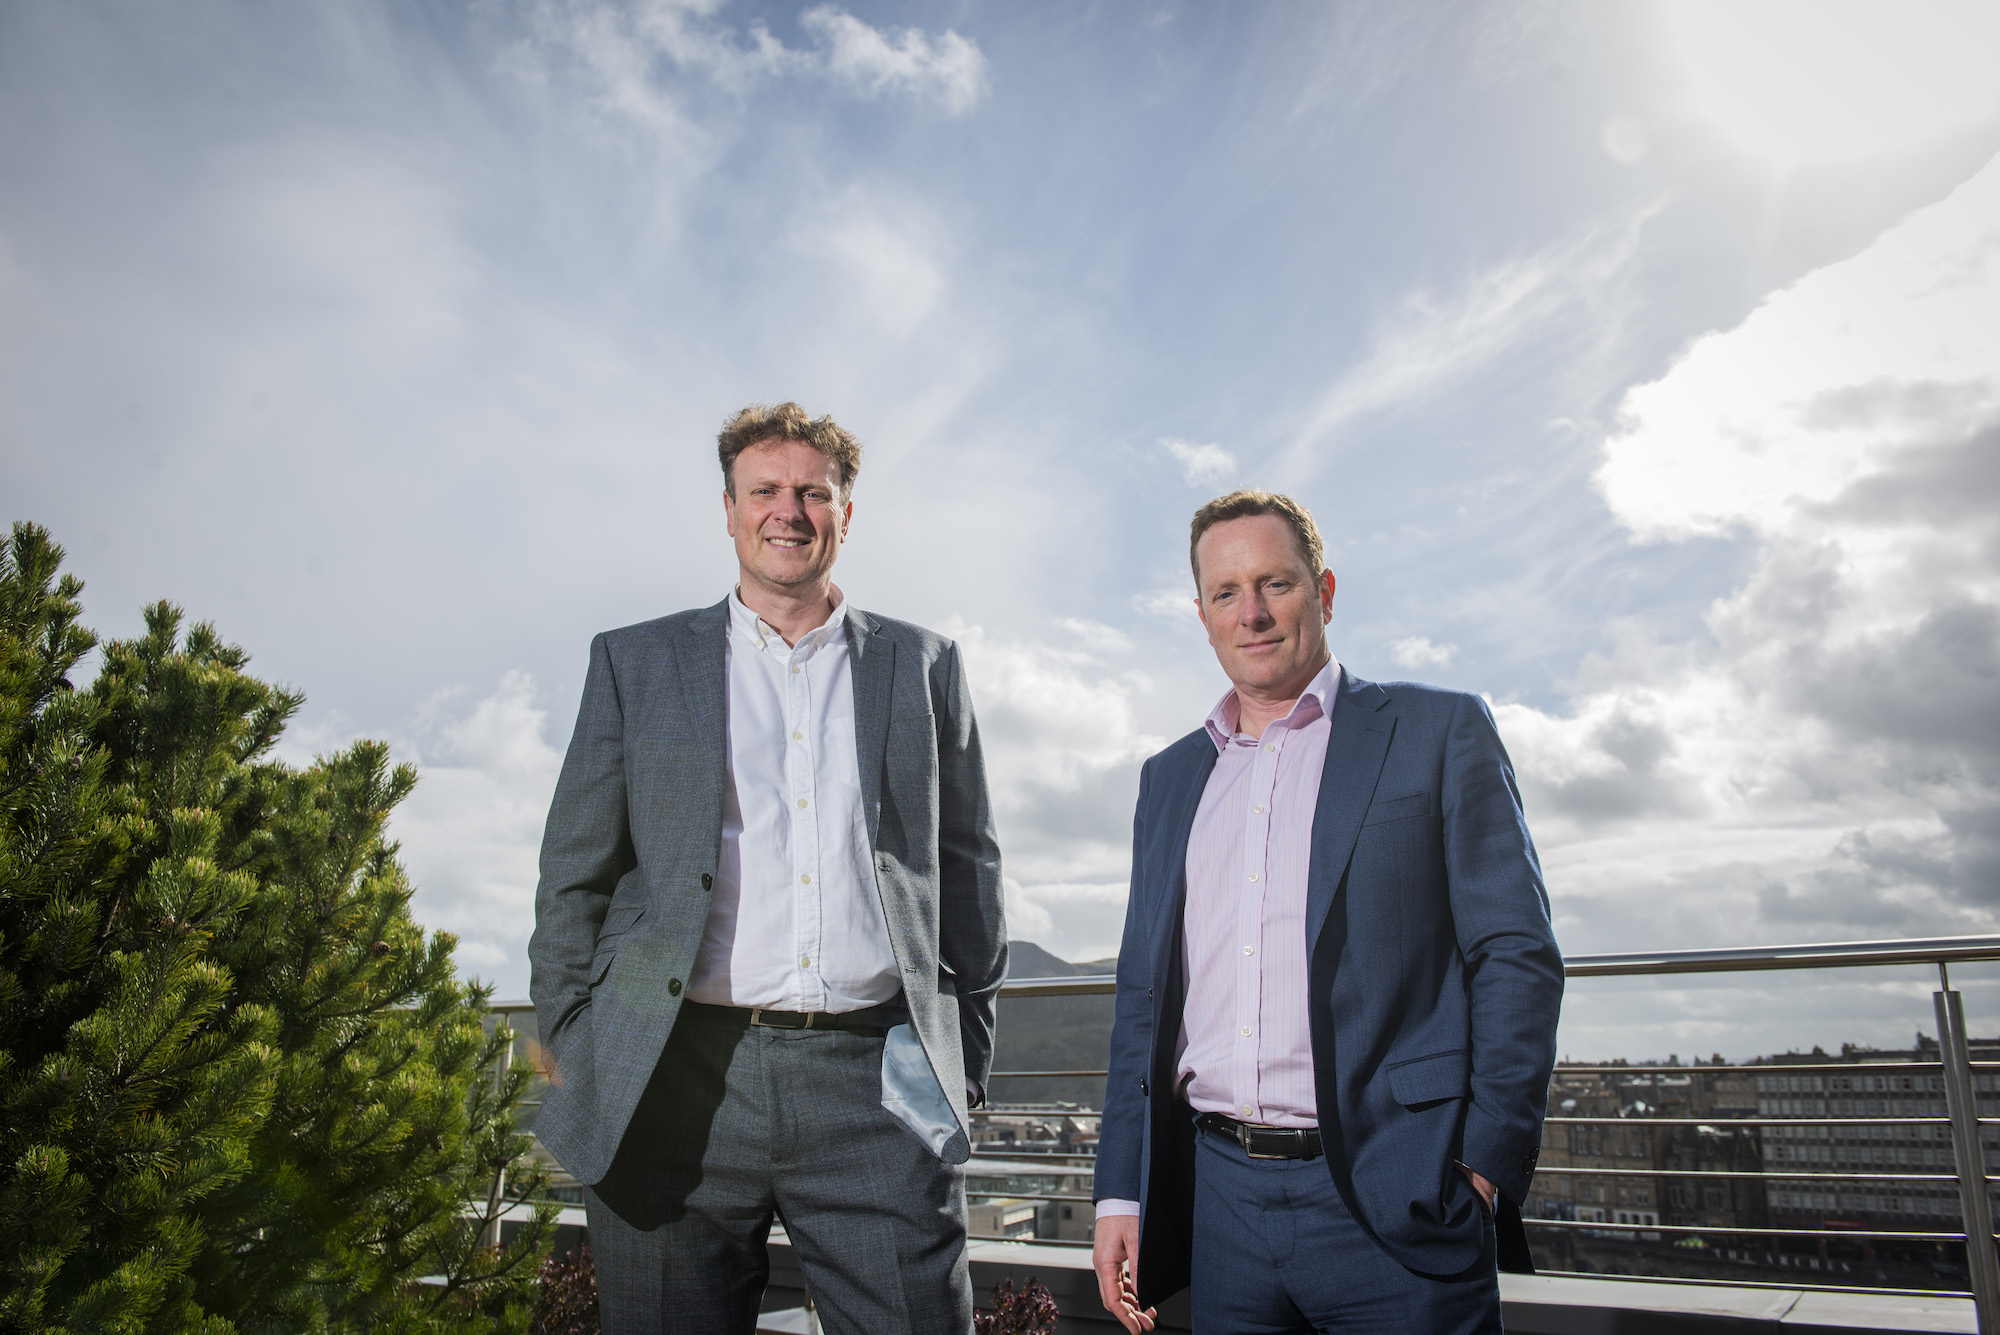 Forrit secures £5 million from Scottish National Investment Bank